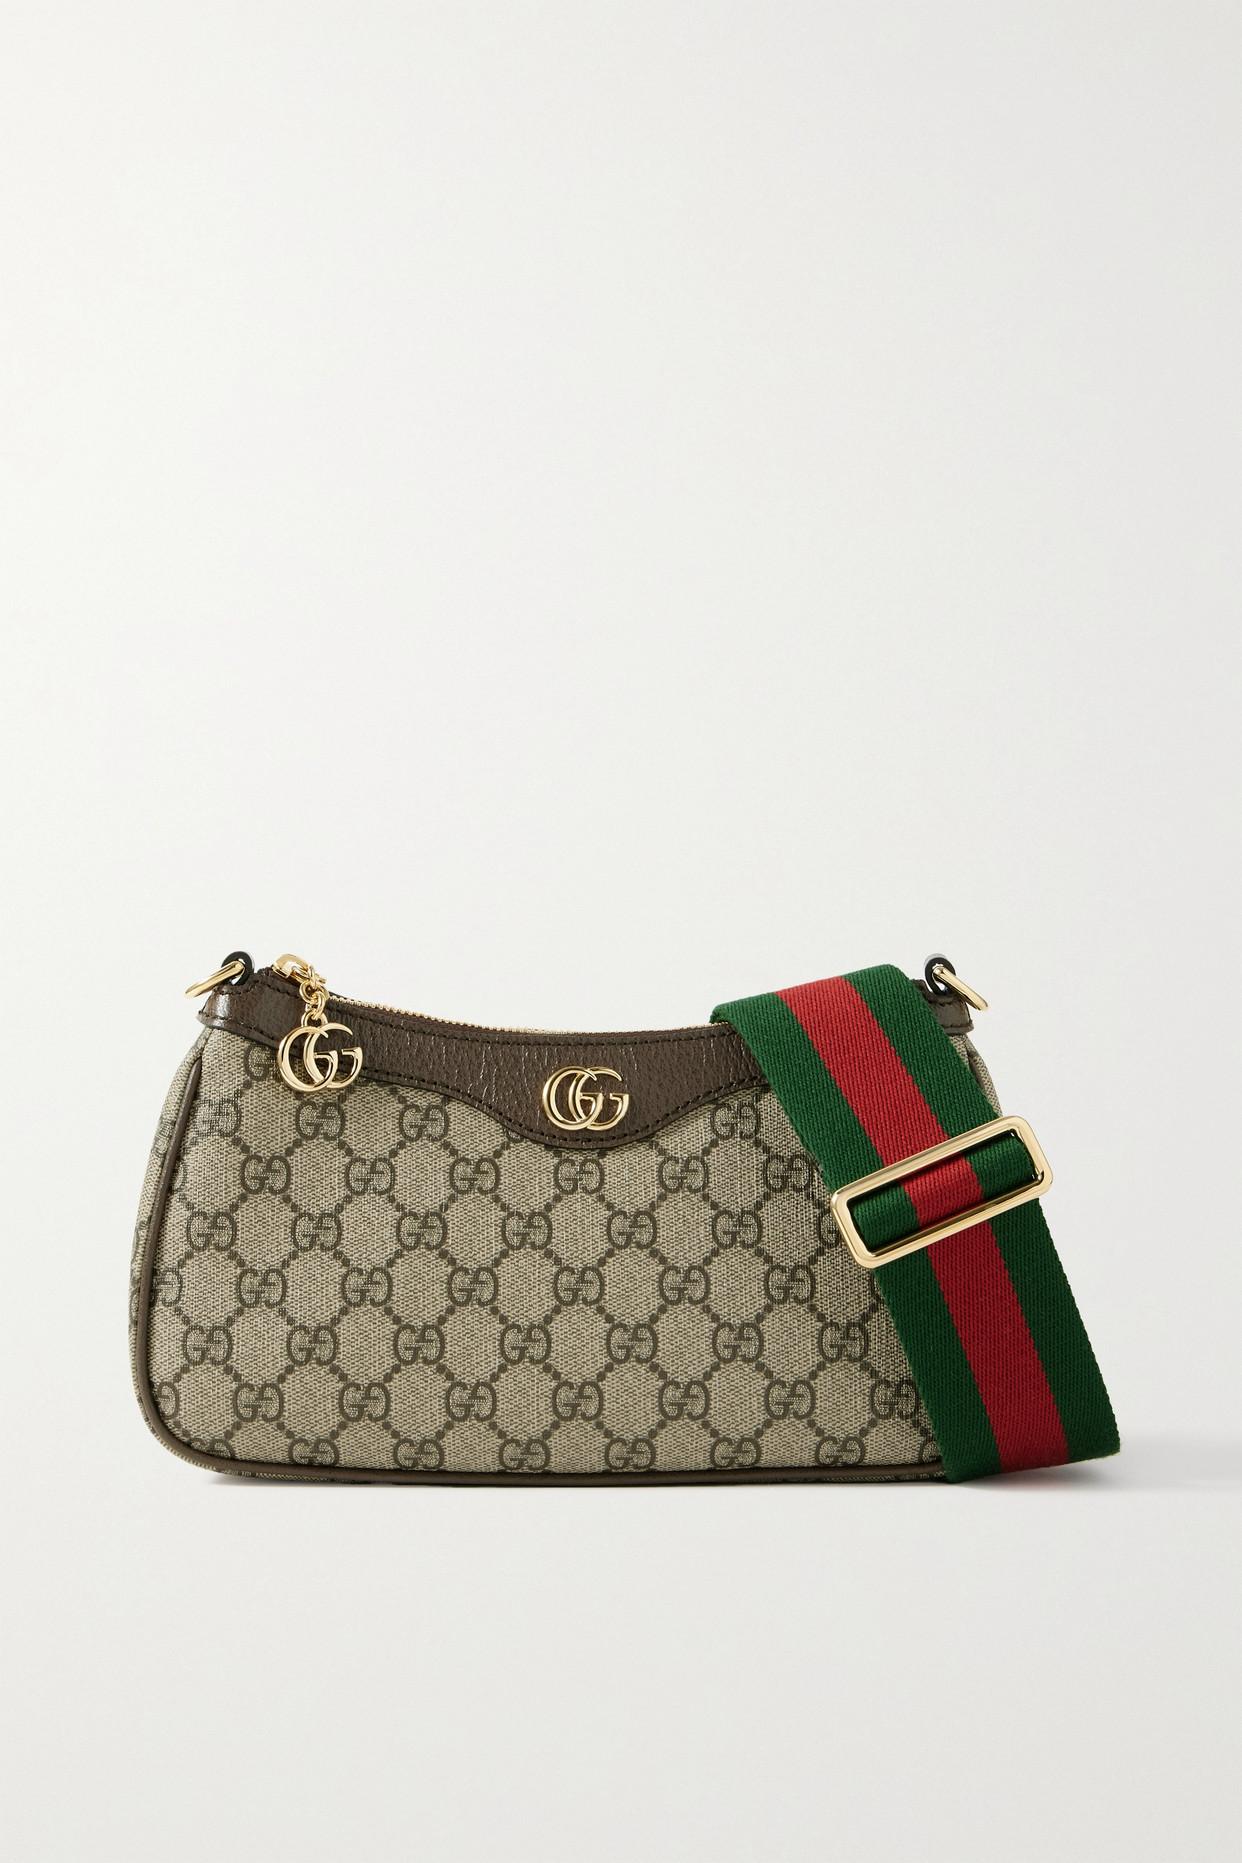 Gucci Ophidia Embellished Textured Leather-trimmed Printed Coated-canvas  Shoulder Bag in Natural | Lyst